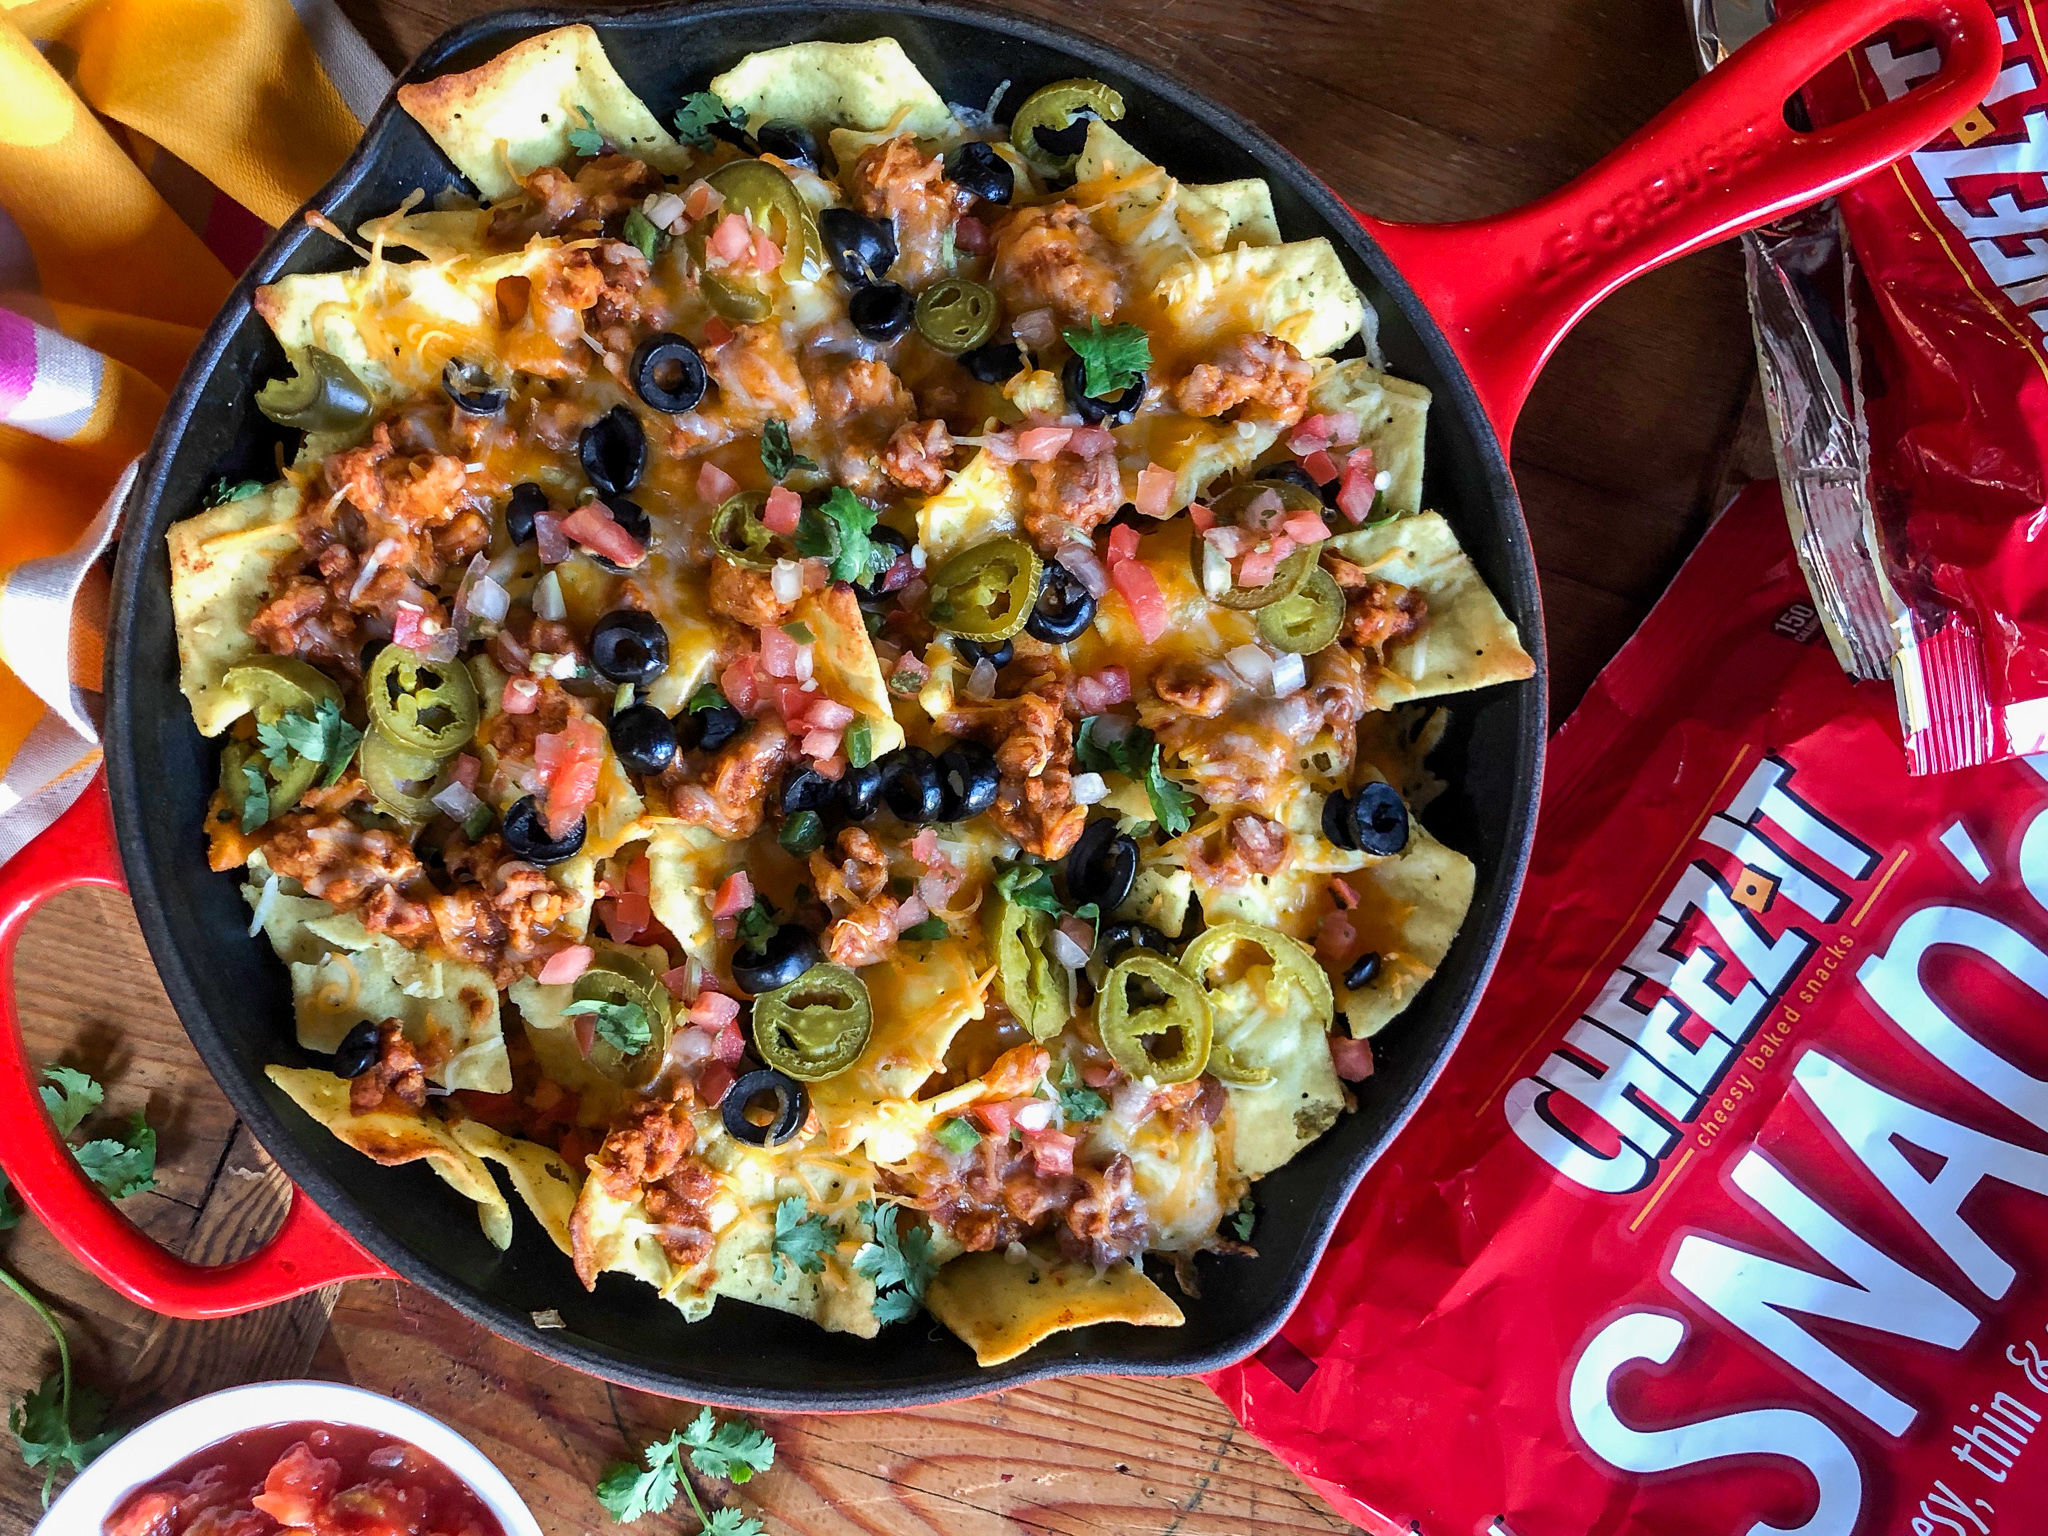 Snap'd Nachos Are The Perfect Game Day Snack! on I Heart Publix 1